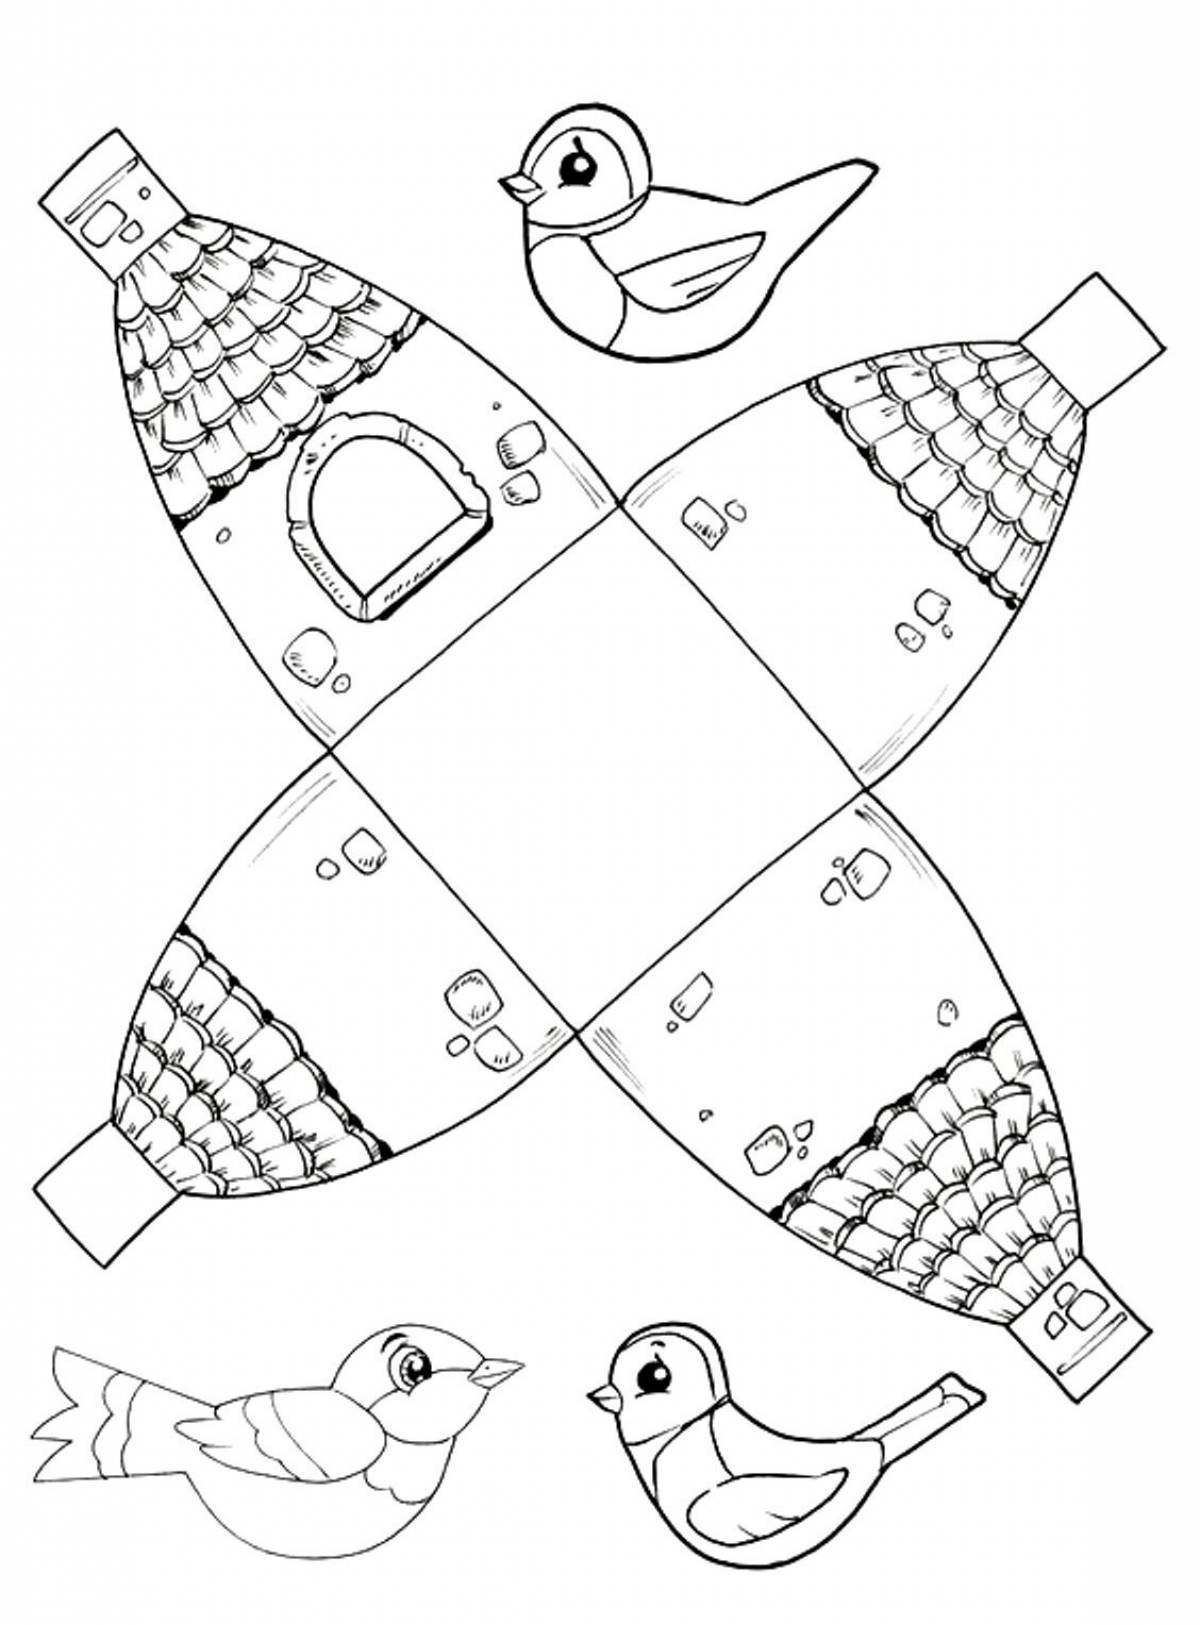 Colorful Christmas crafts coloring pages